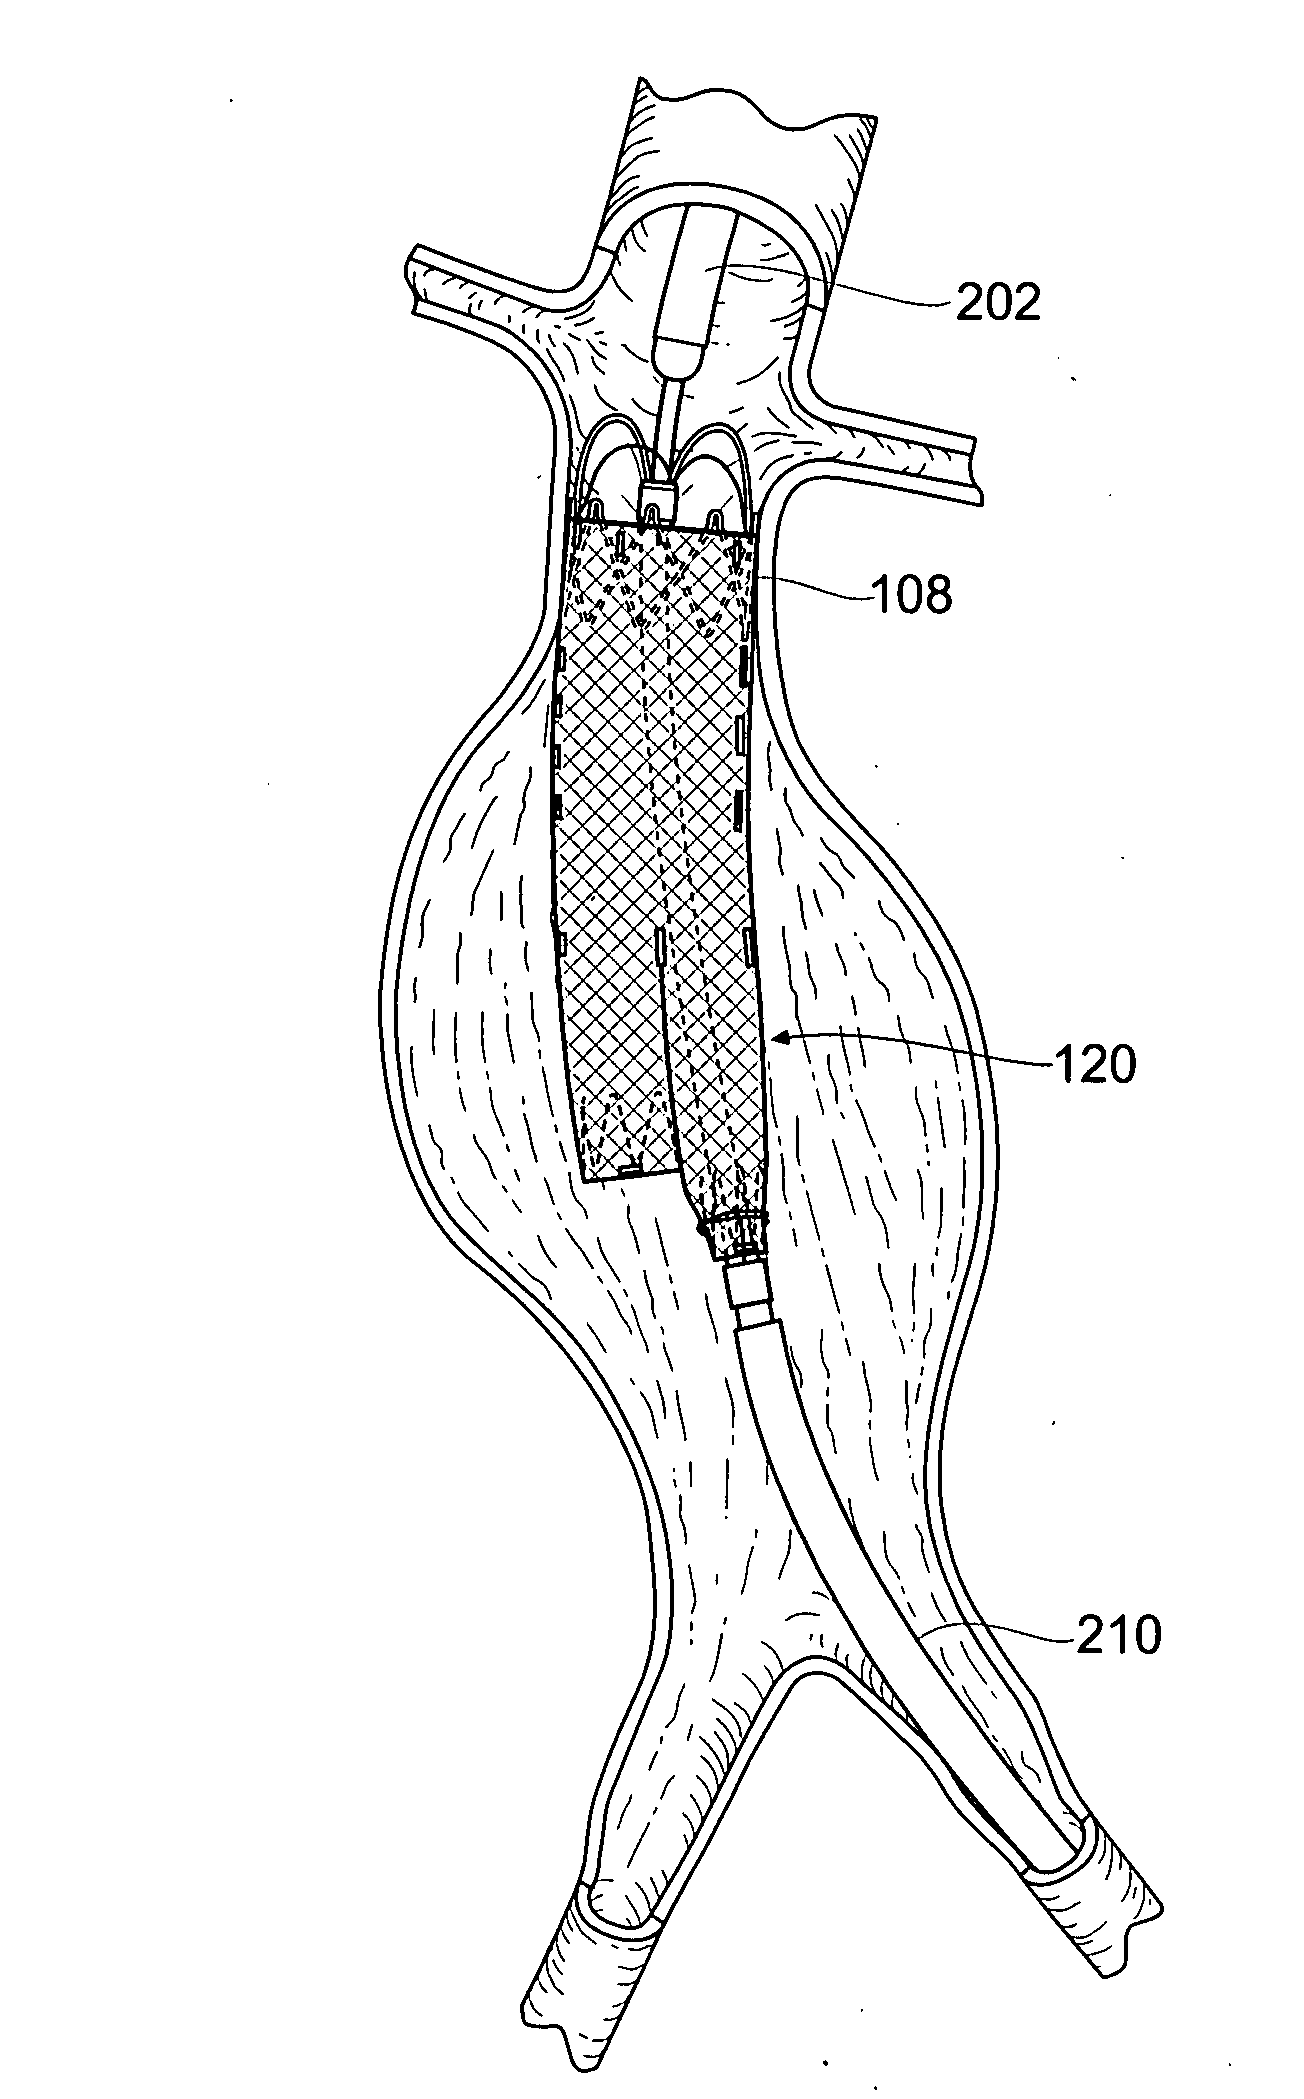 Devices, systems, and methods for prosthesis delivery and implantation